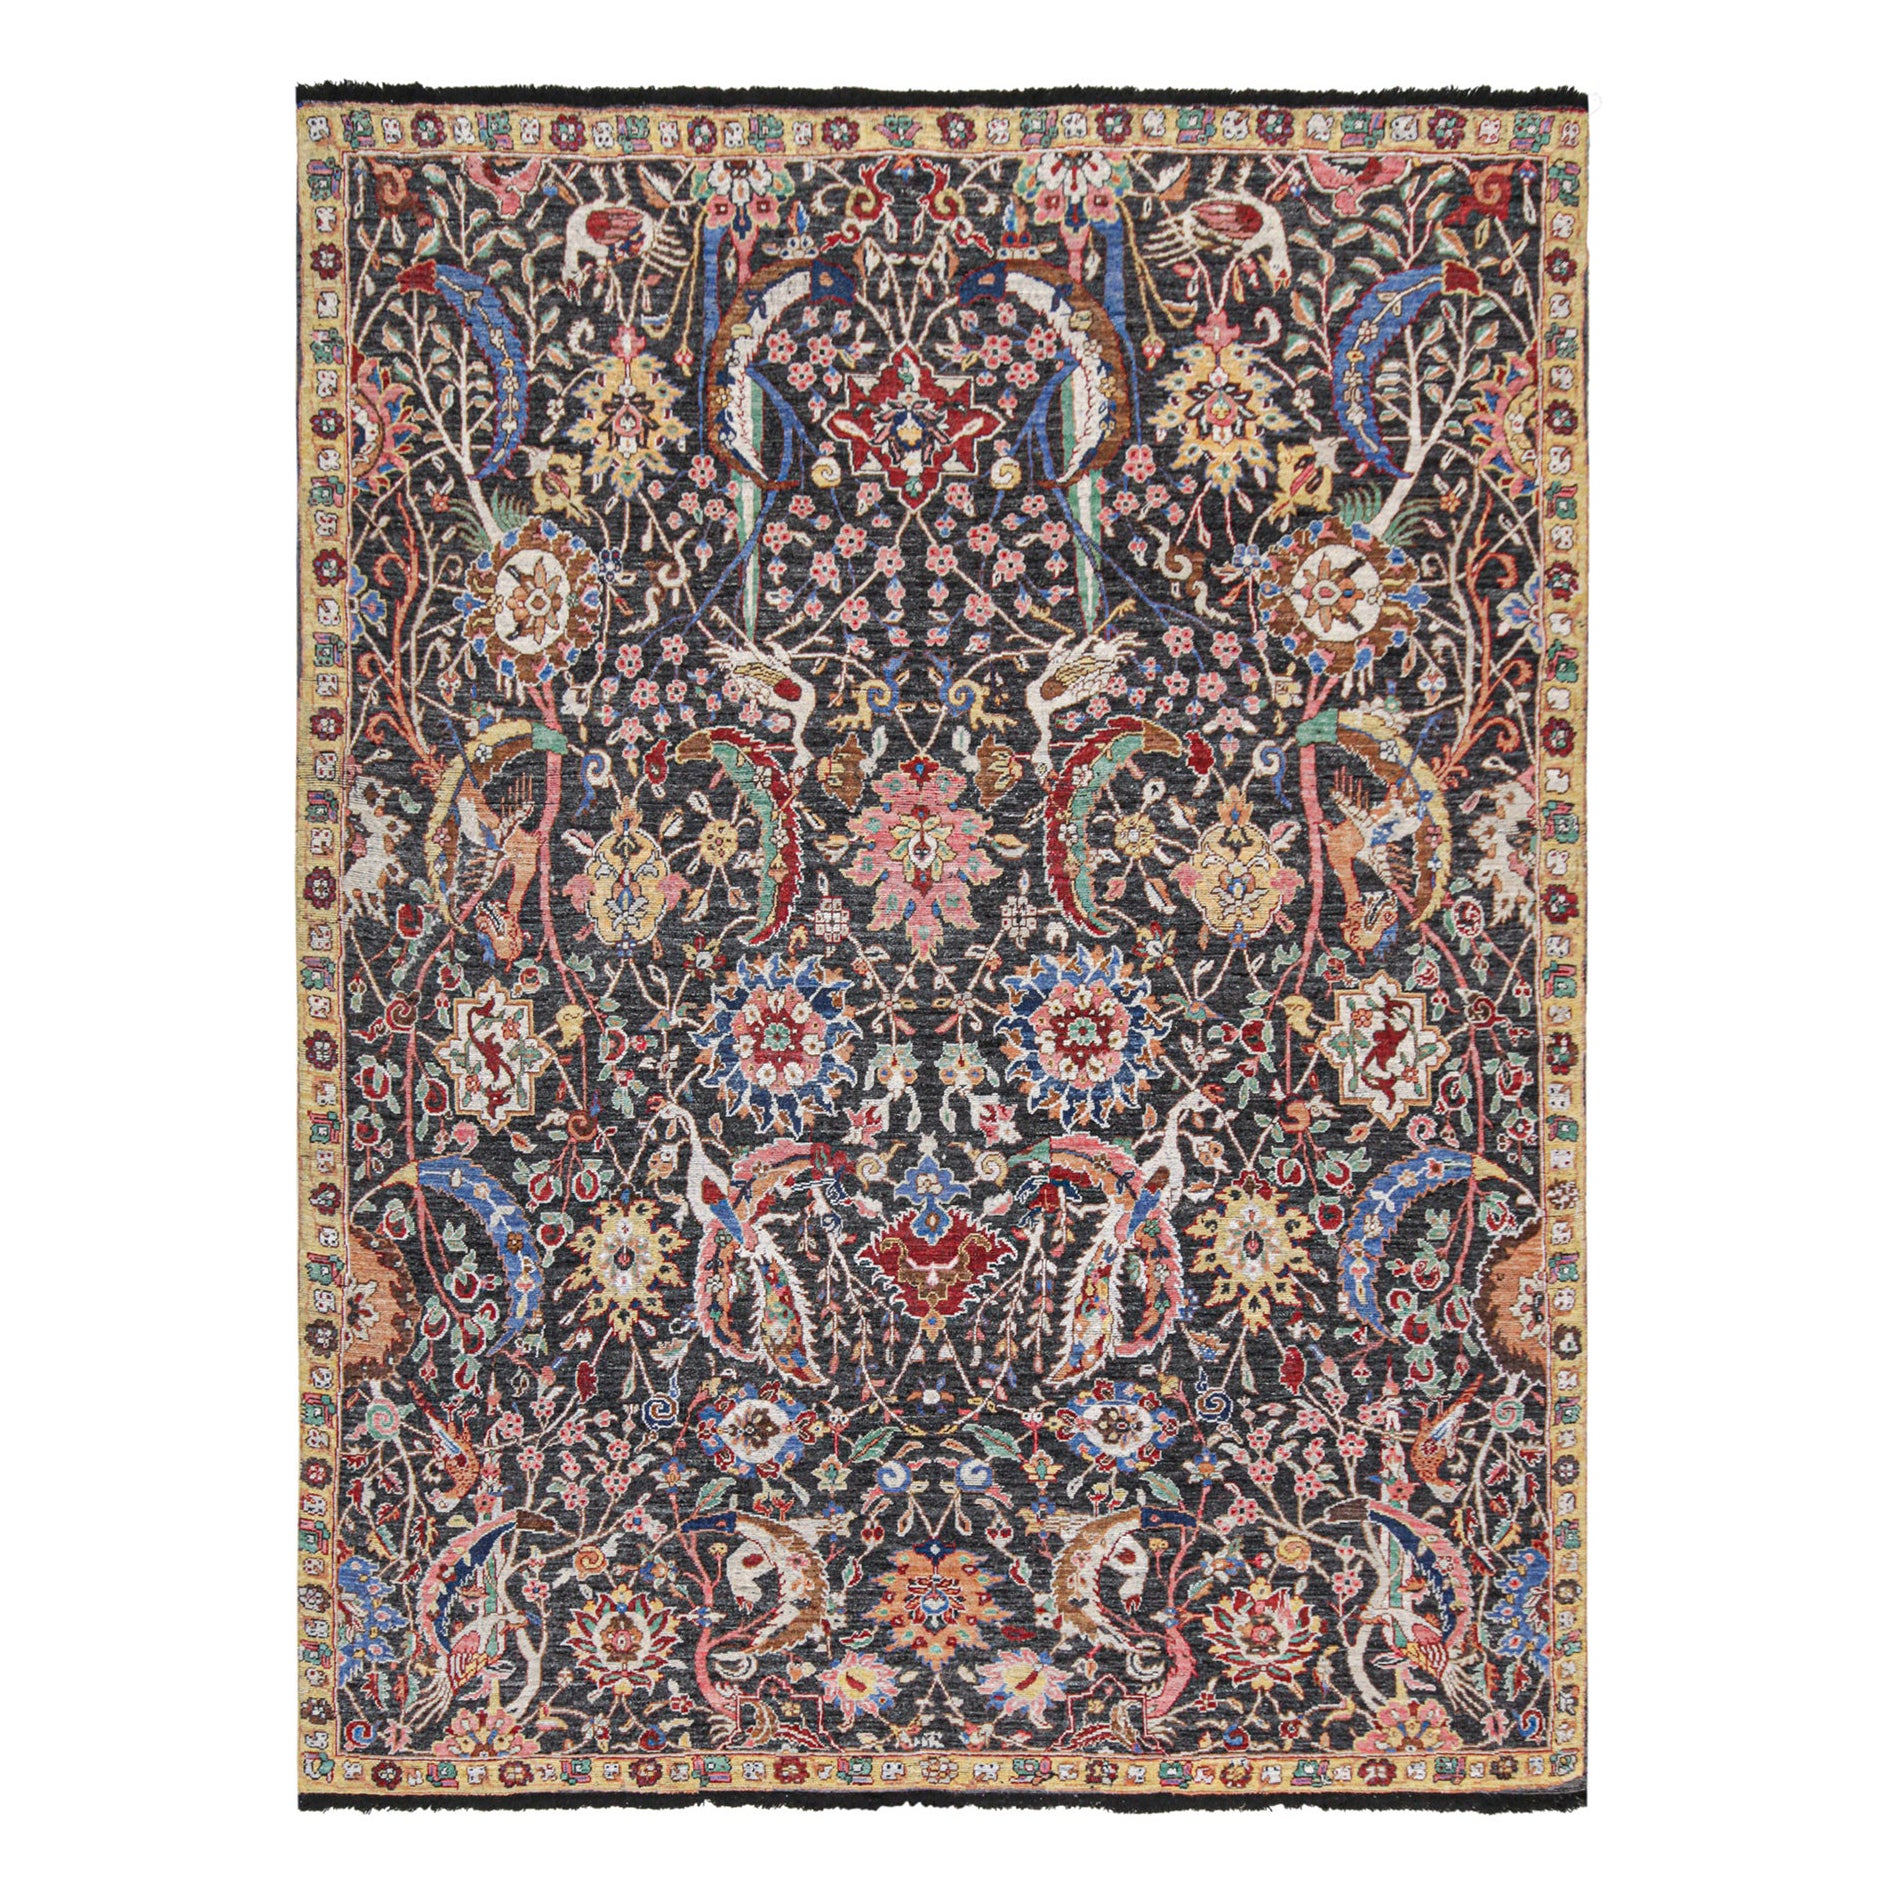 Rug & Kilim’s Persian-Style Rug in Gray with Vibrant Floral Patterns